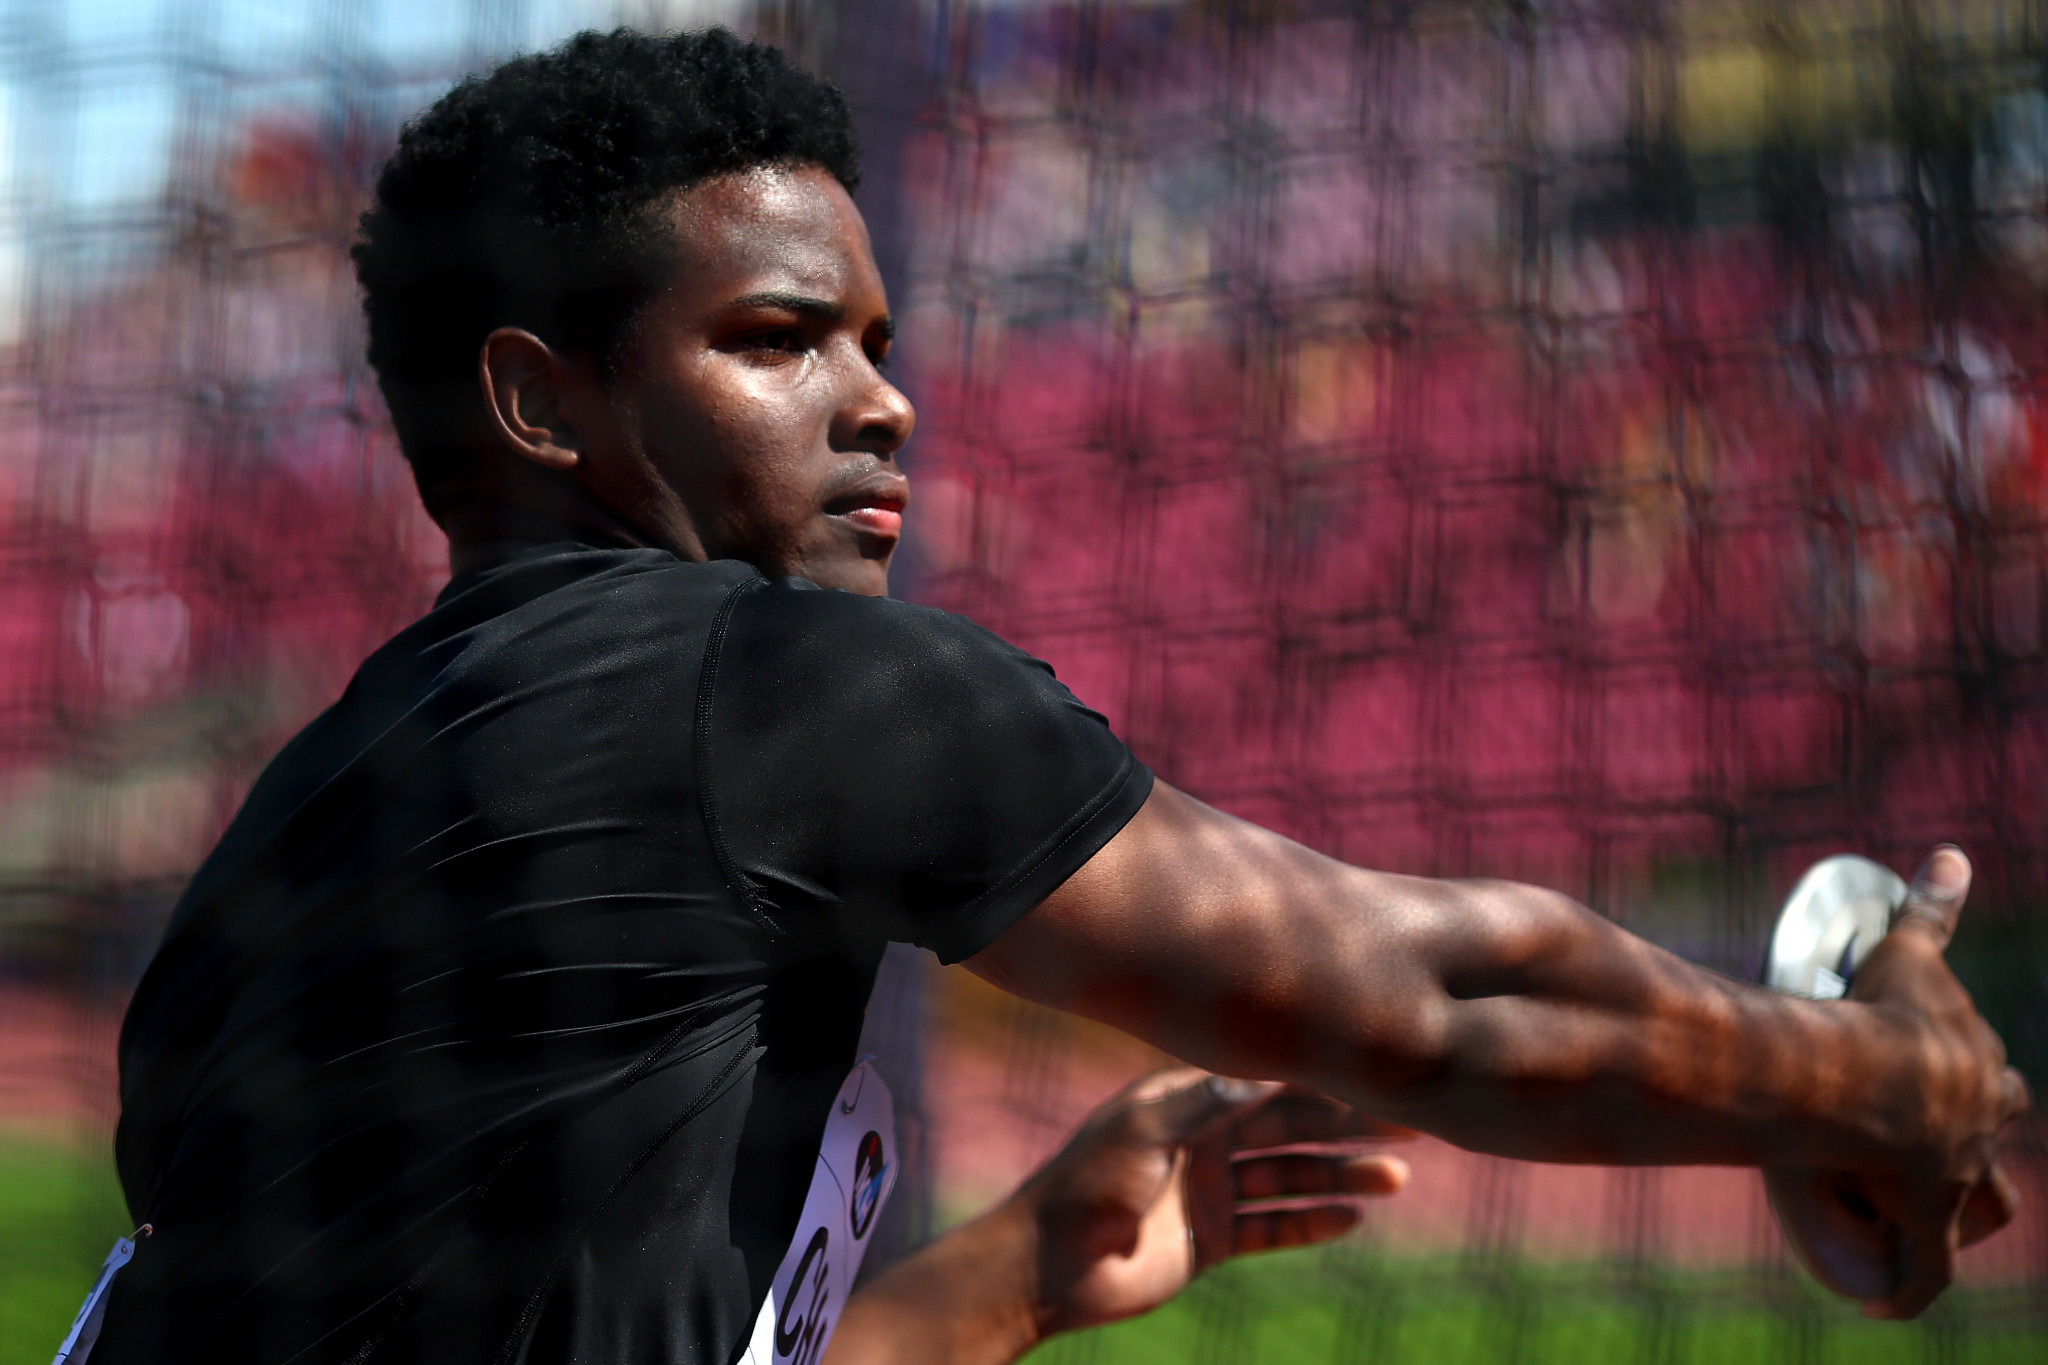 Jamaican Kai Chang showed why he is the reigning world under-20 discus champion as he threw 59.36 metres ©Getty Images